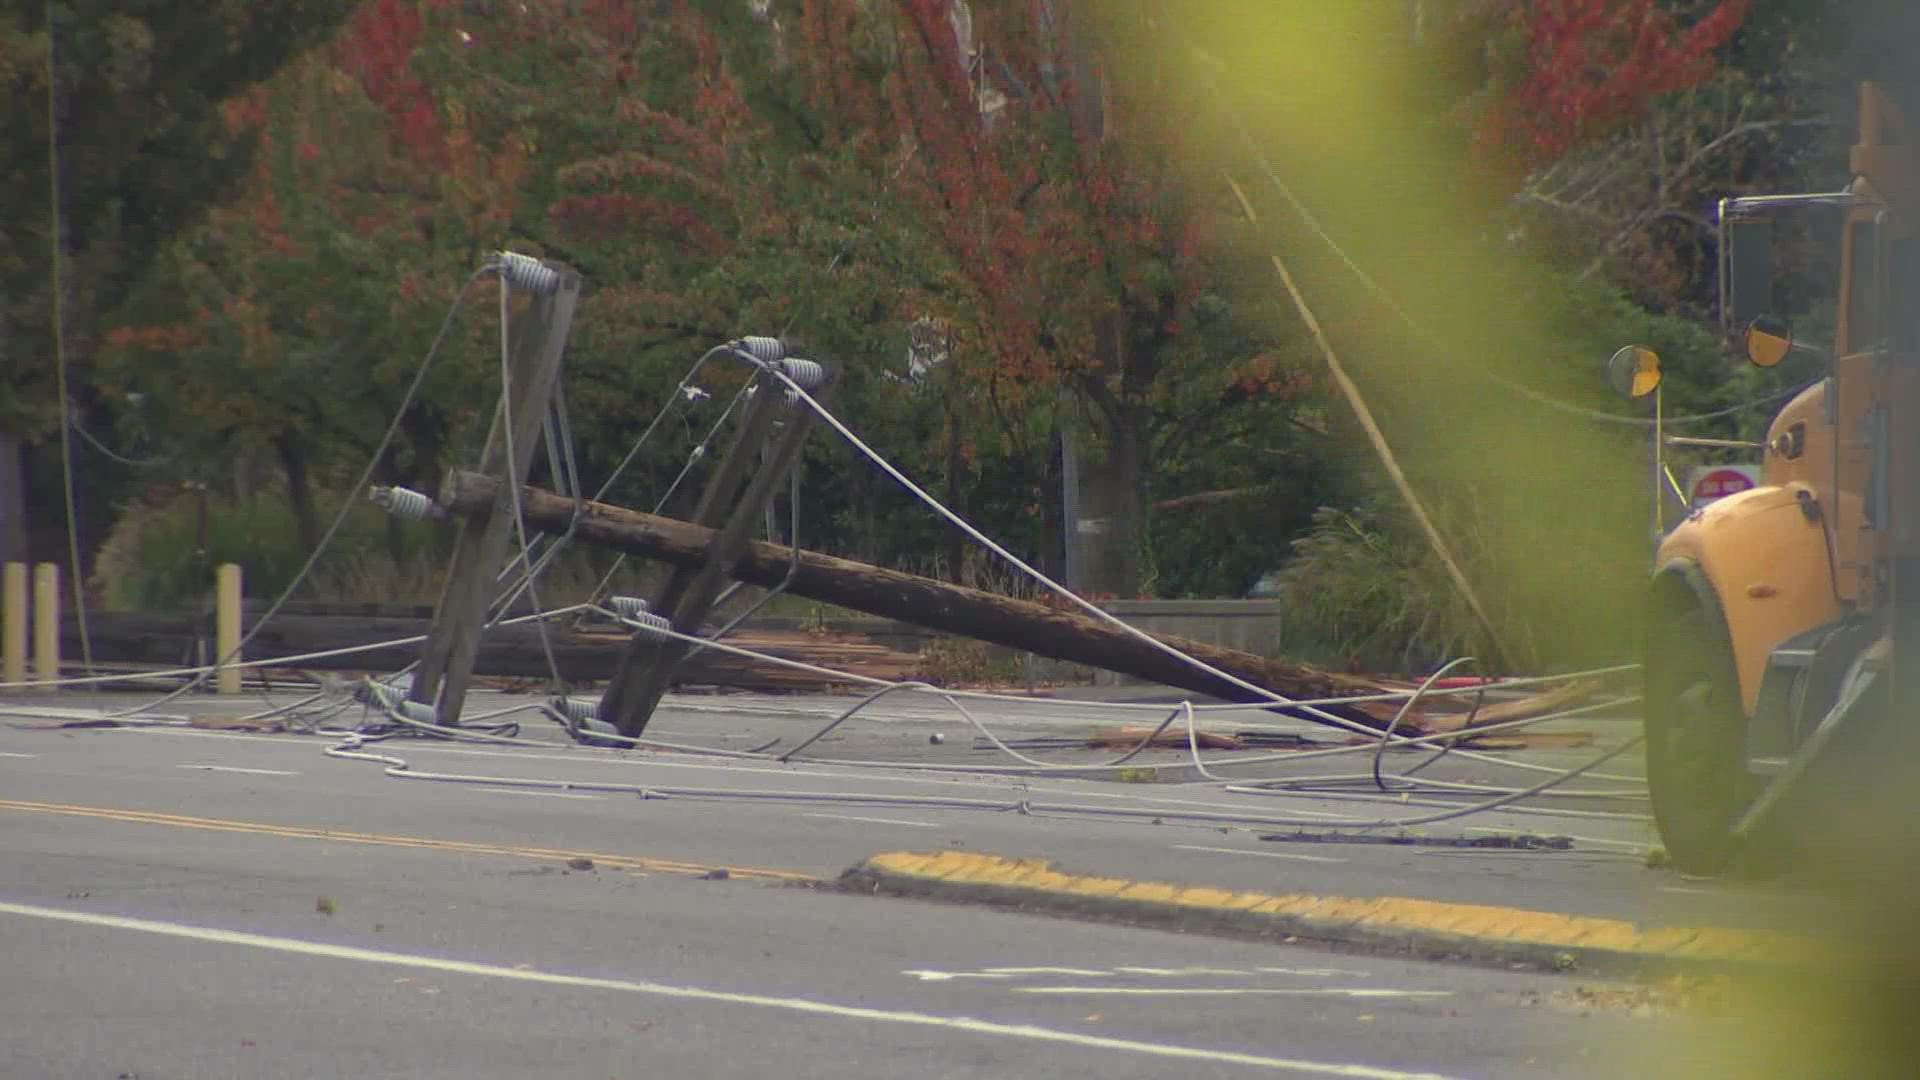 The 15 poles that fell Sunday are being transferred to a different location for inspection.